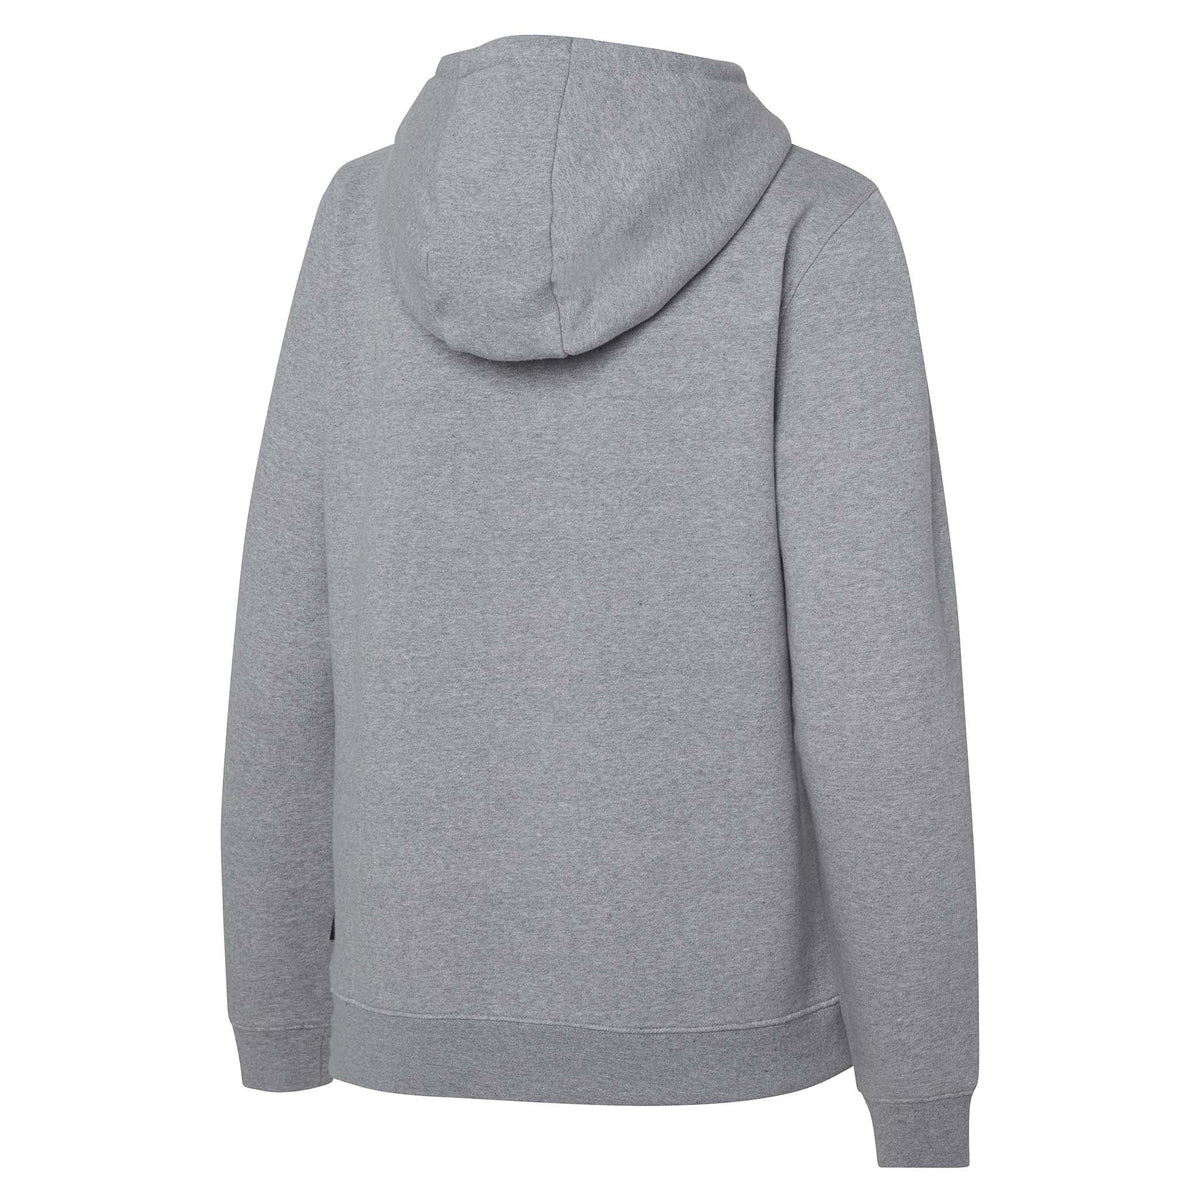 Saucony Rested Hoody kangourou a capuche gris femme dos